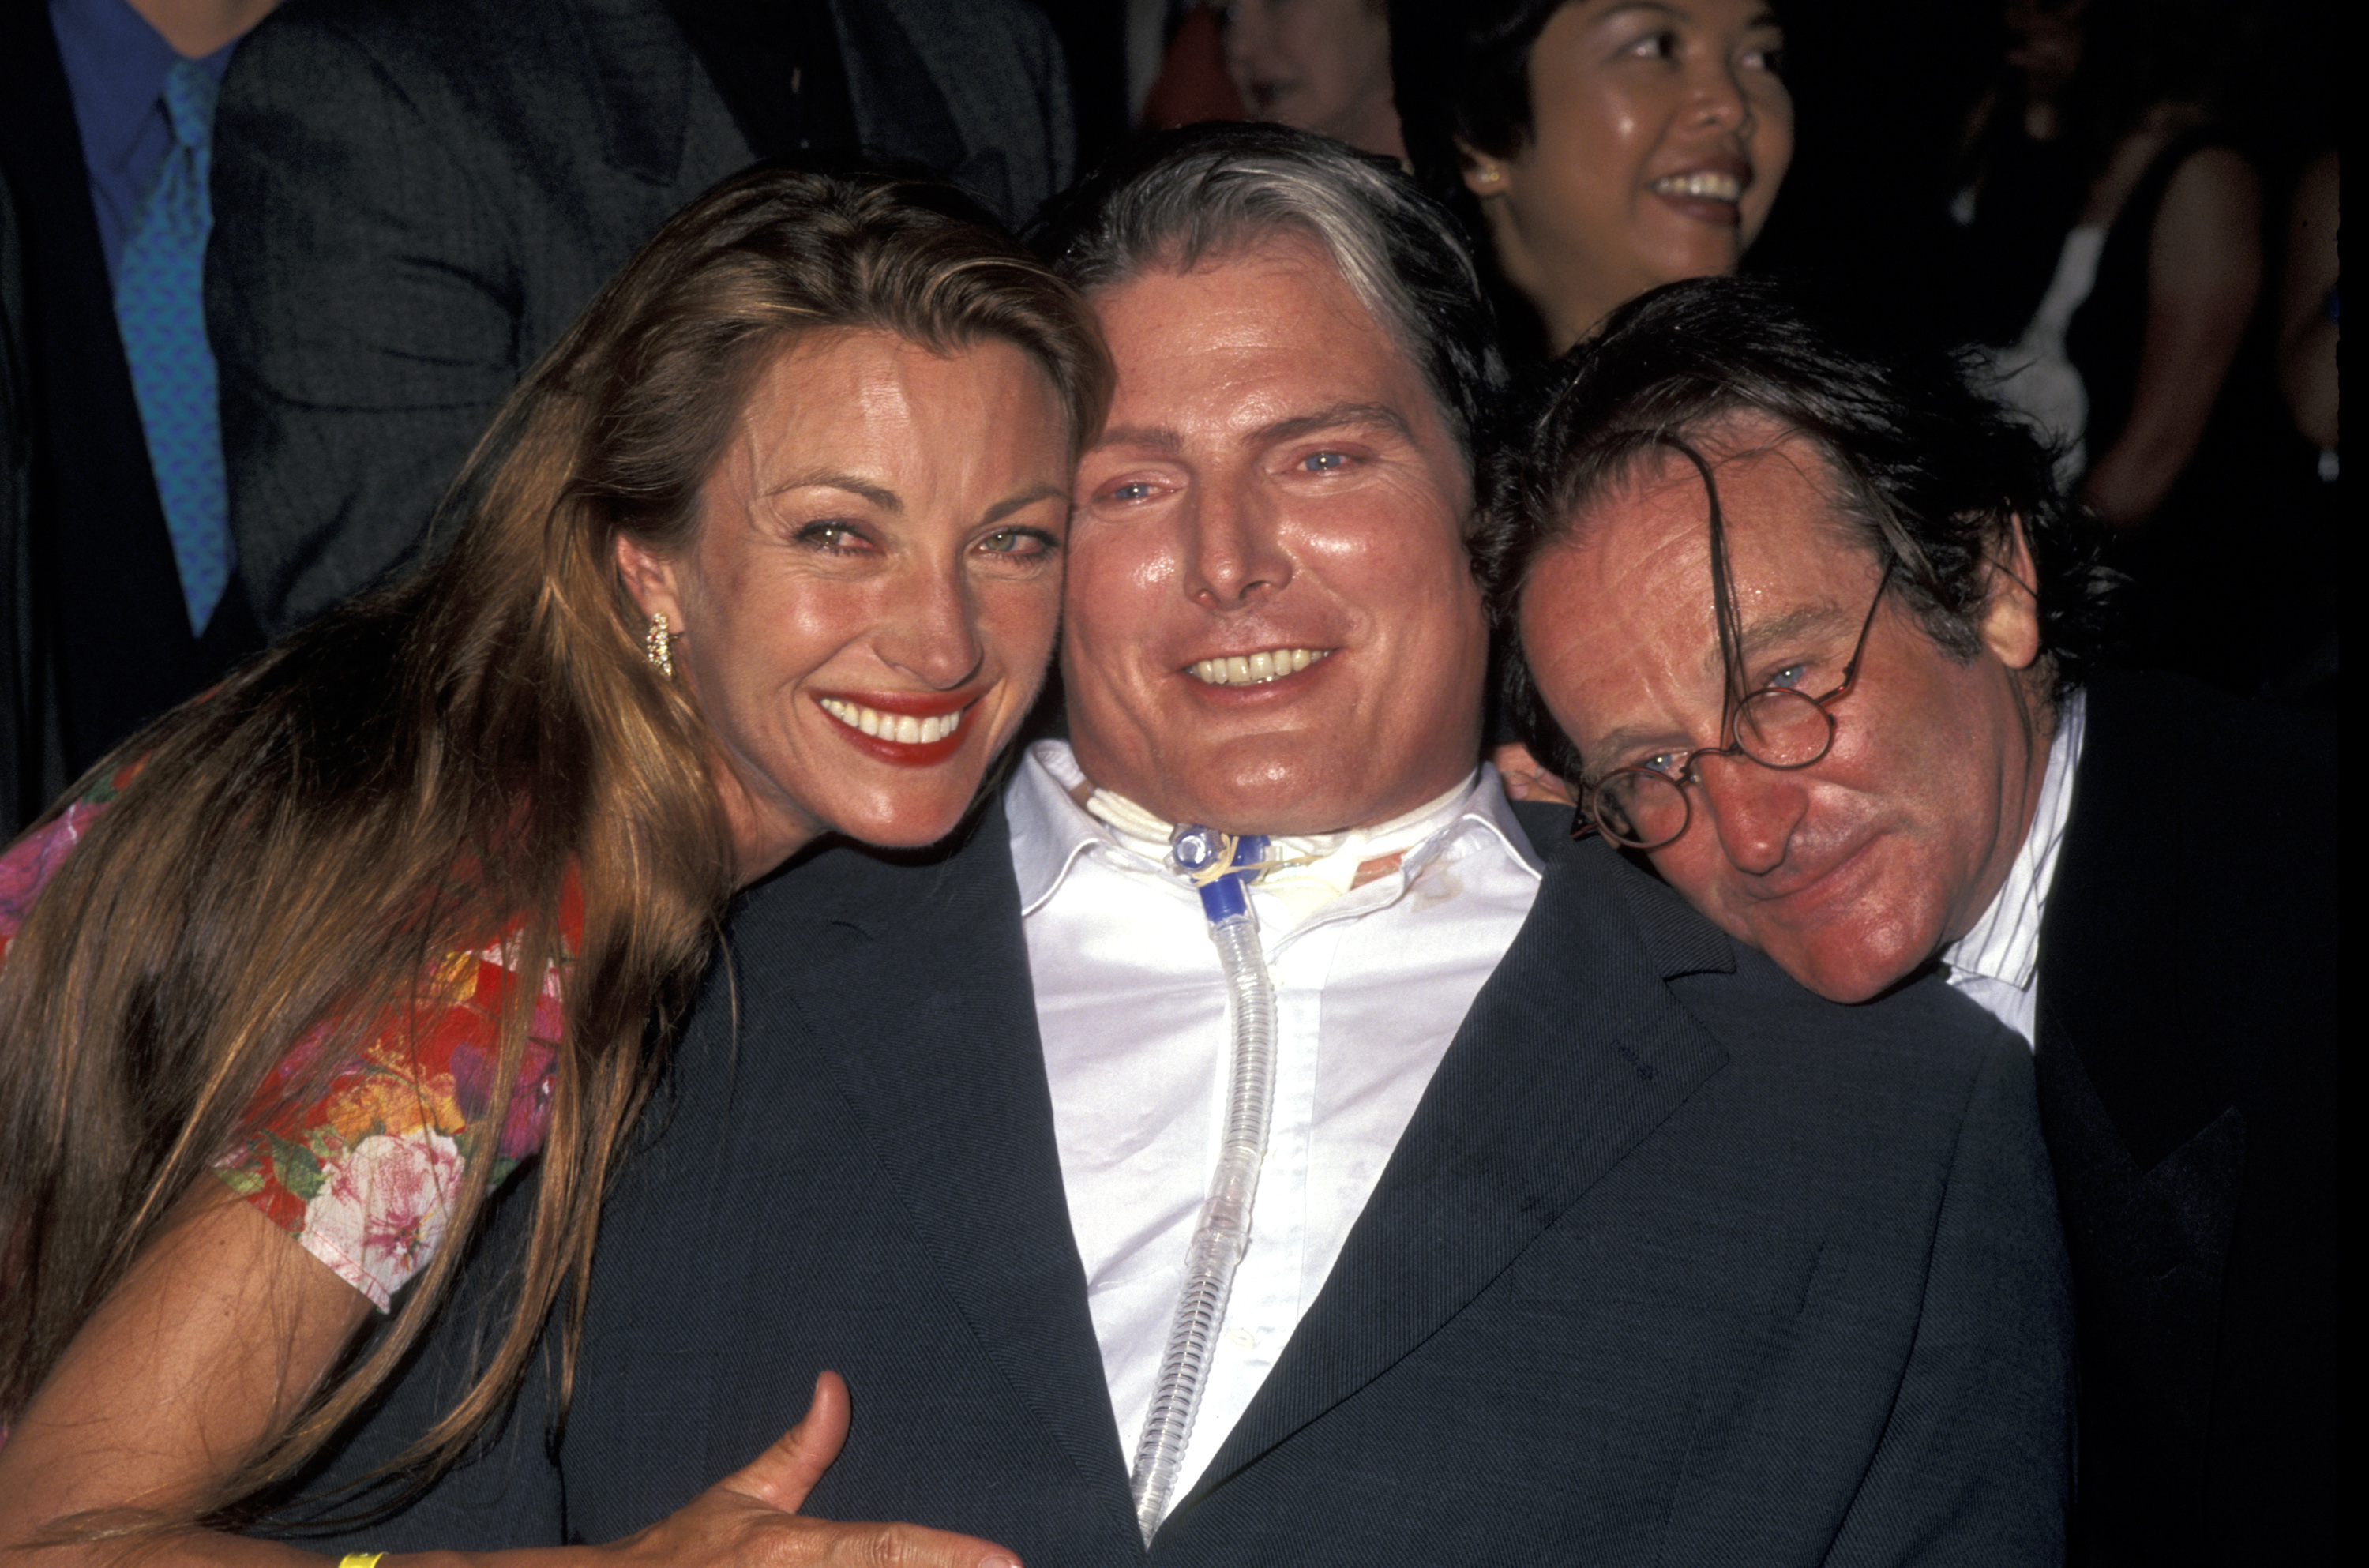 Jane Seymour, Christopher Reeve, and Robin Williams at Invitational Awards Dinner, 1997. | Source: Getty Images